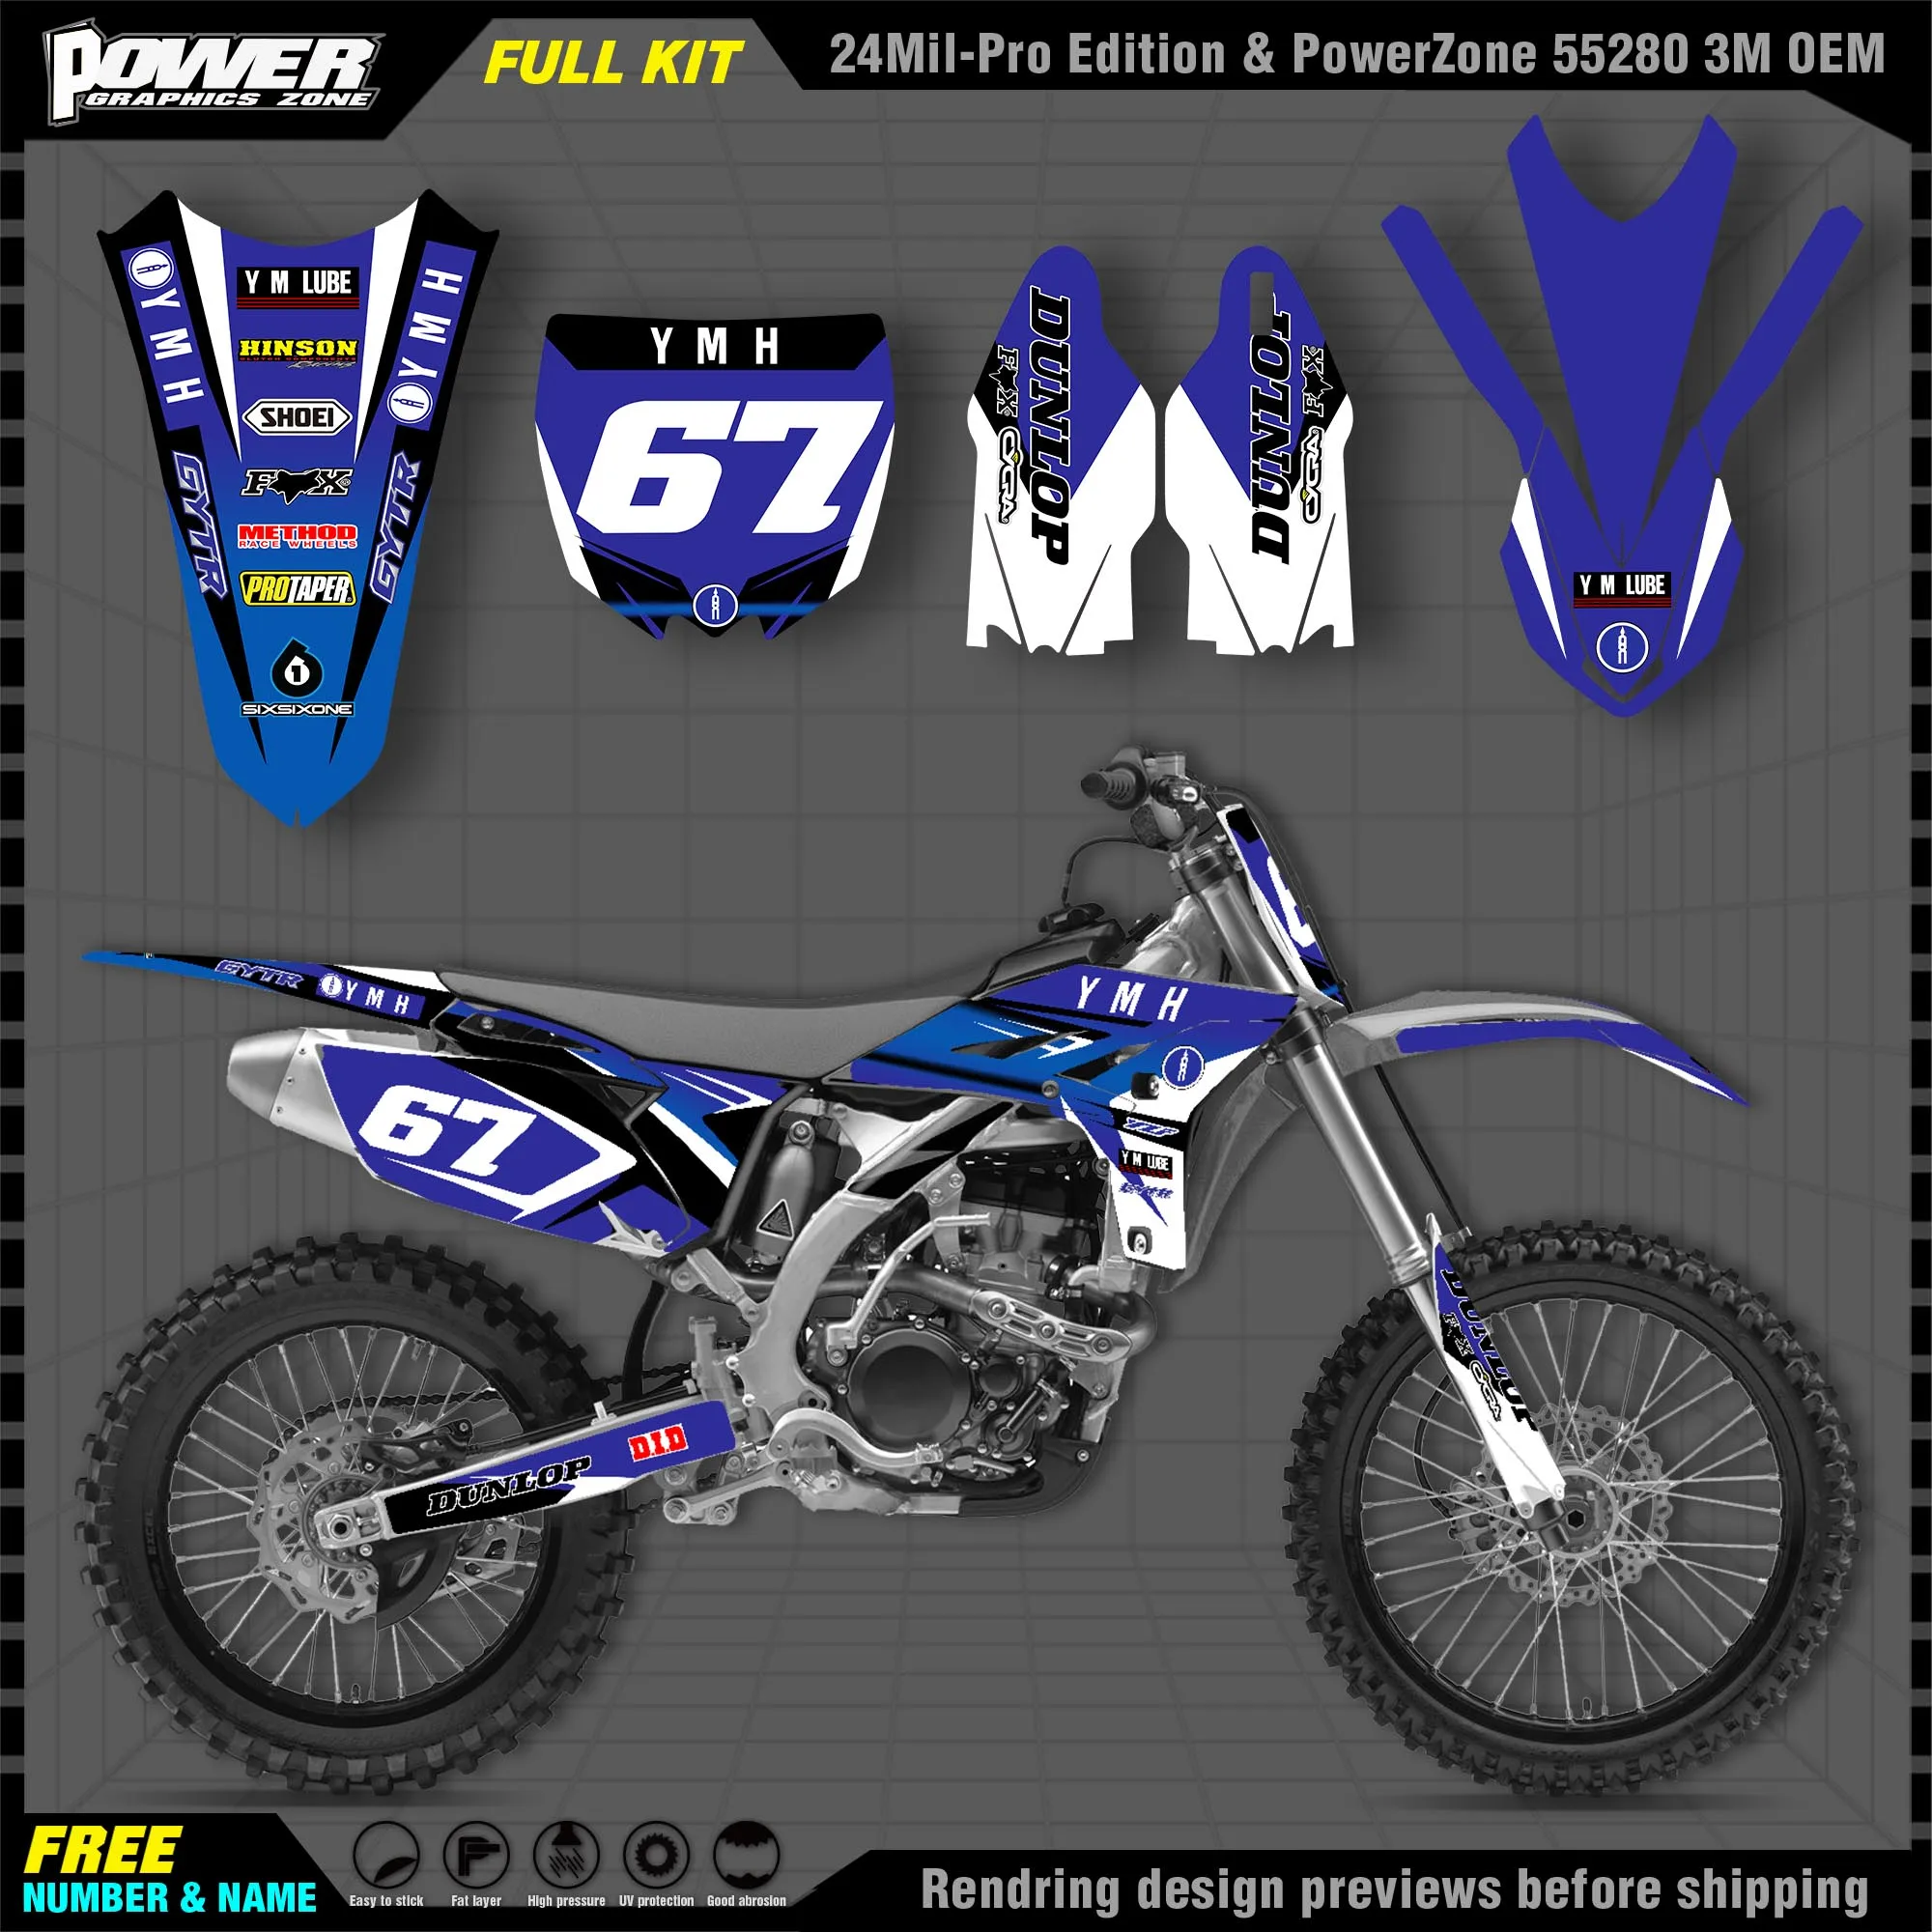 

PowerZone Custom Team Graphics Backgrounds Decals 3M Stickers Kit For YAMAHA 2010-2013 YZF250 011